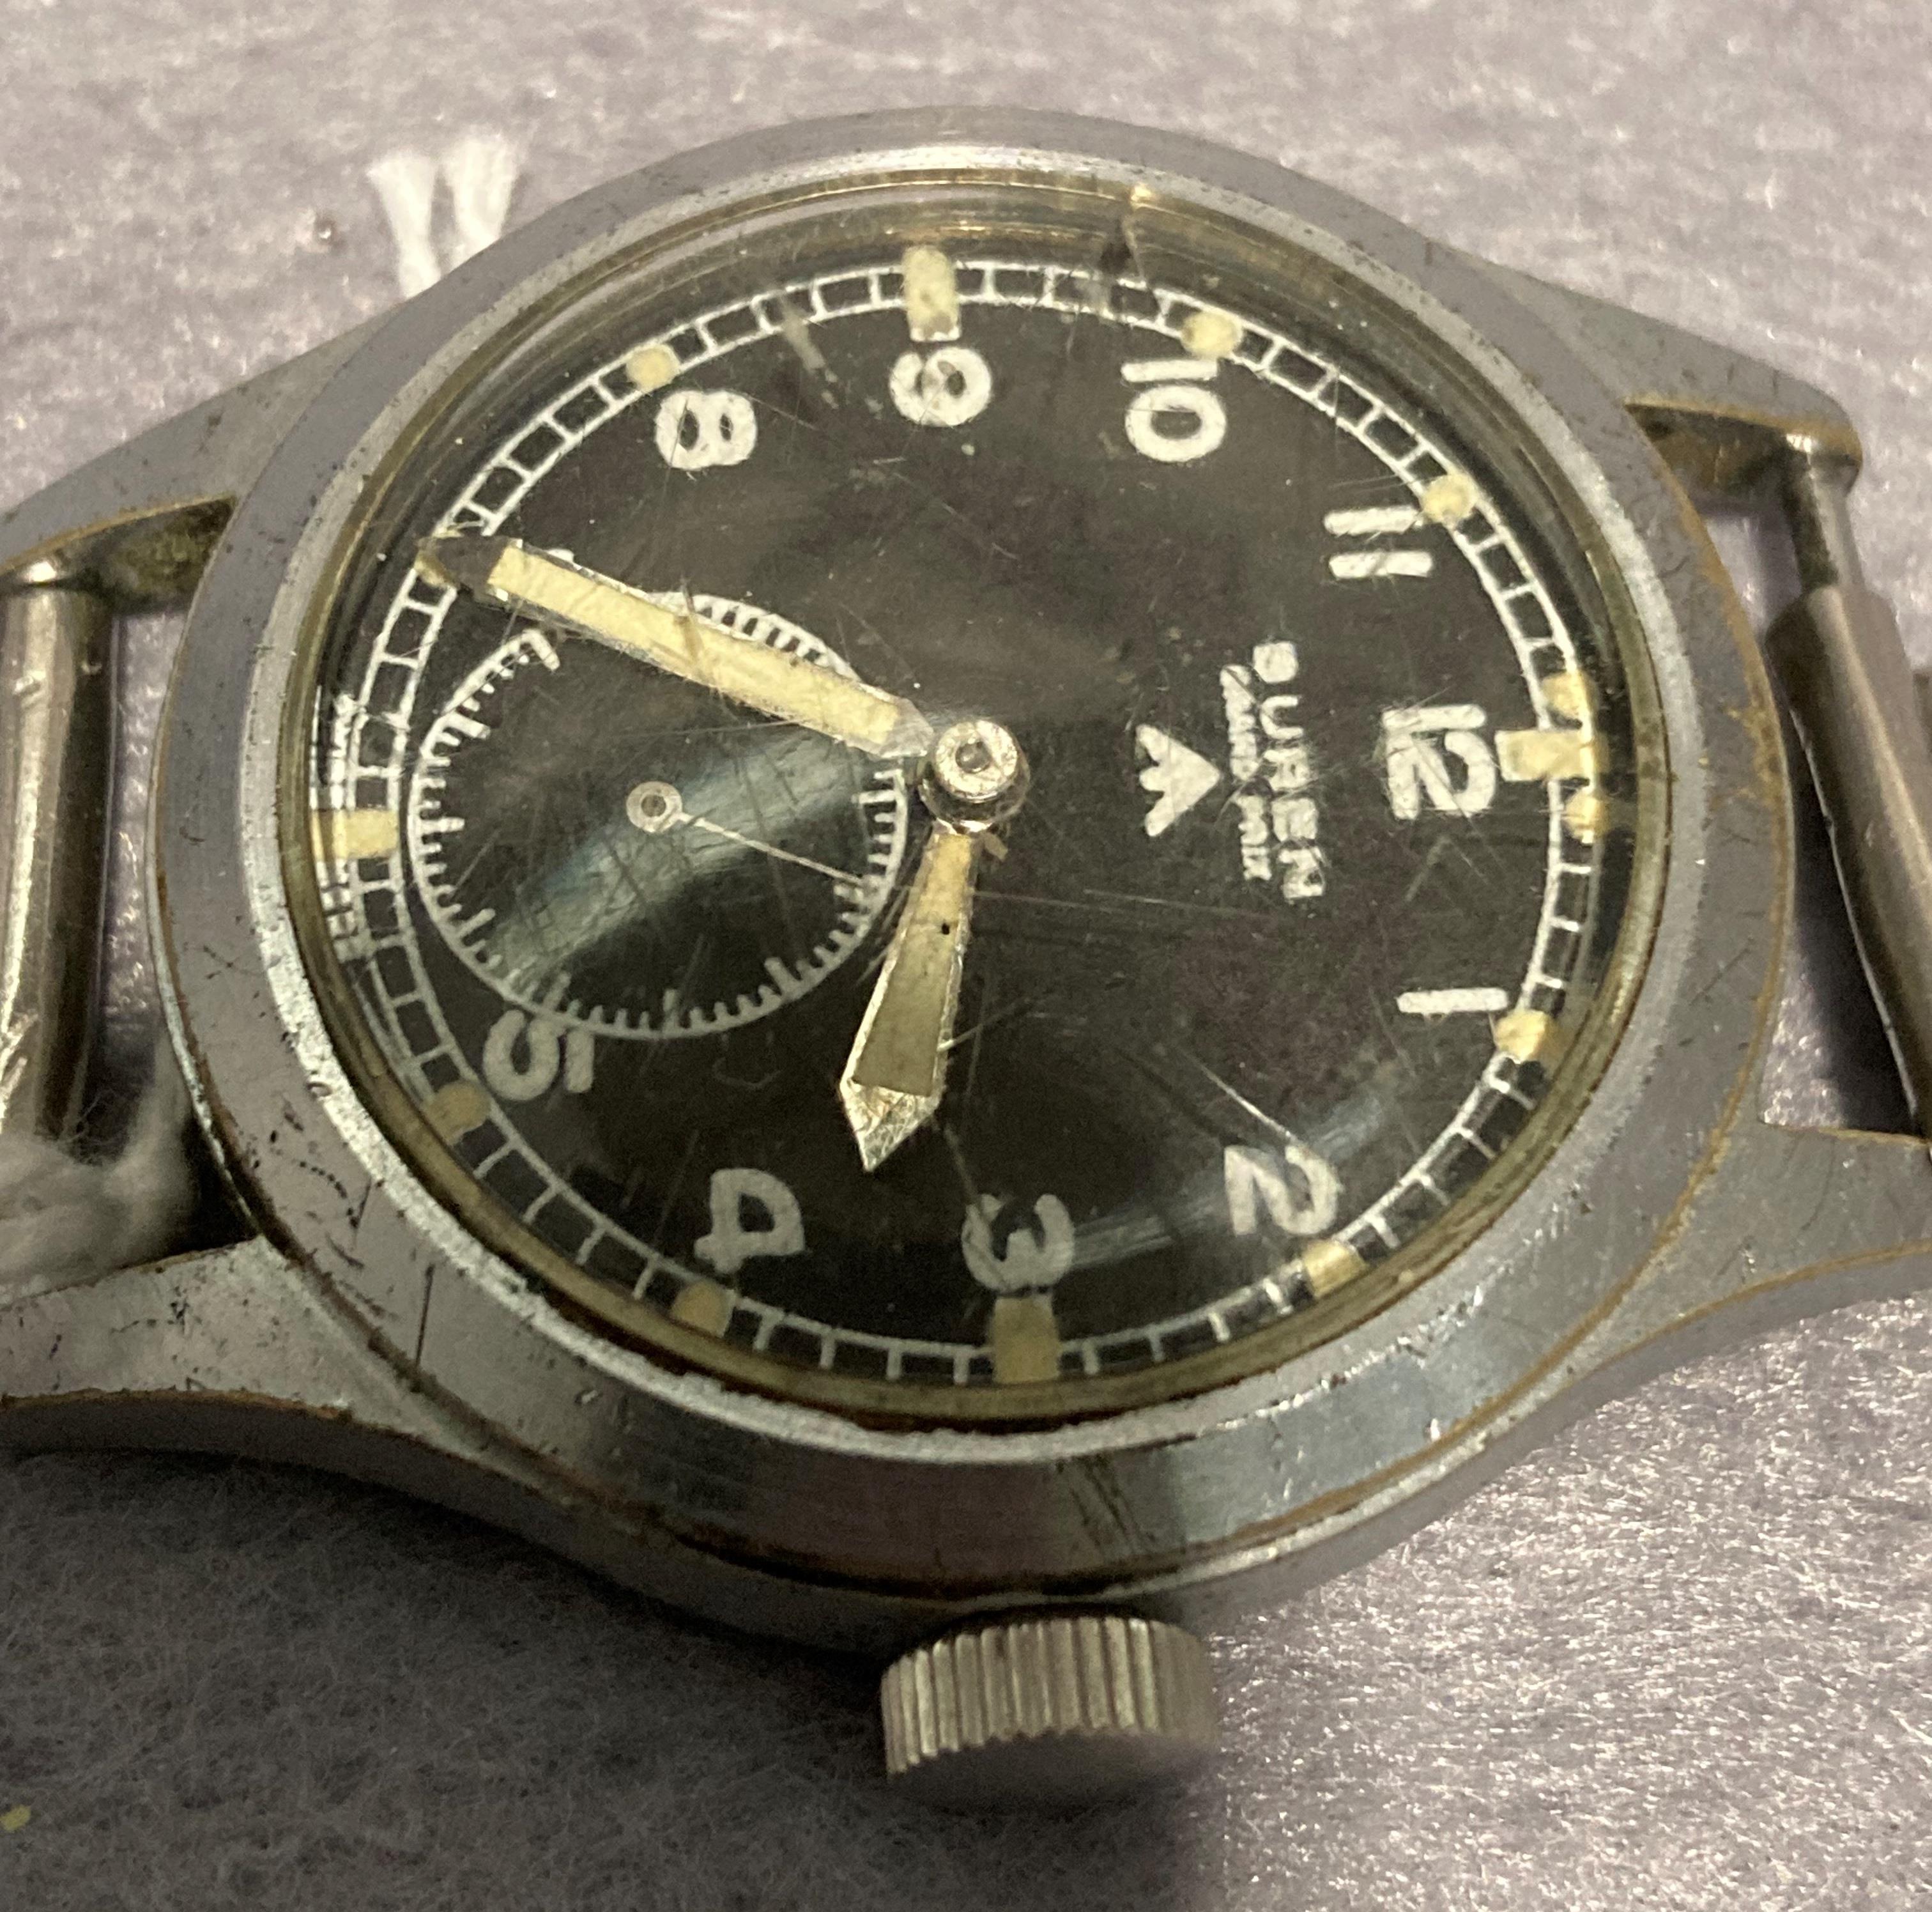 Military issue 'Buren - Grand Prix' WWW Dirty Dozen British Army watch with marking to back, - Image 3 of 9